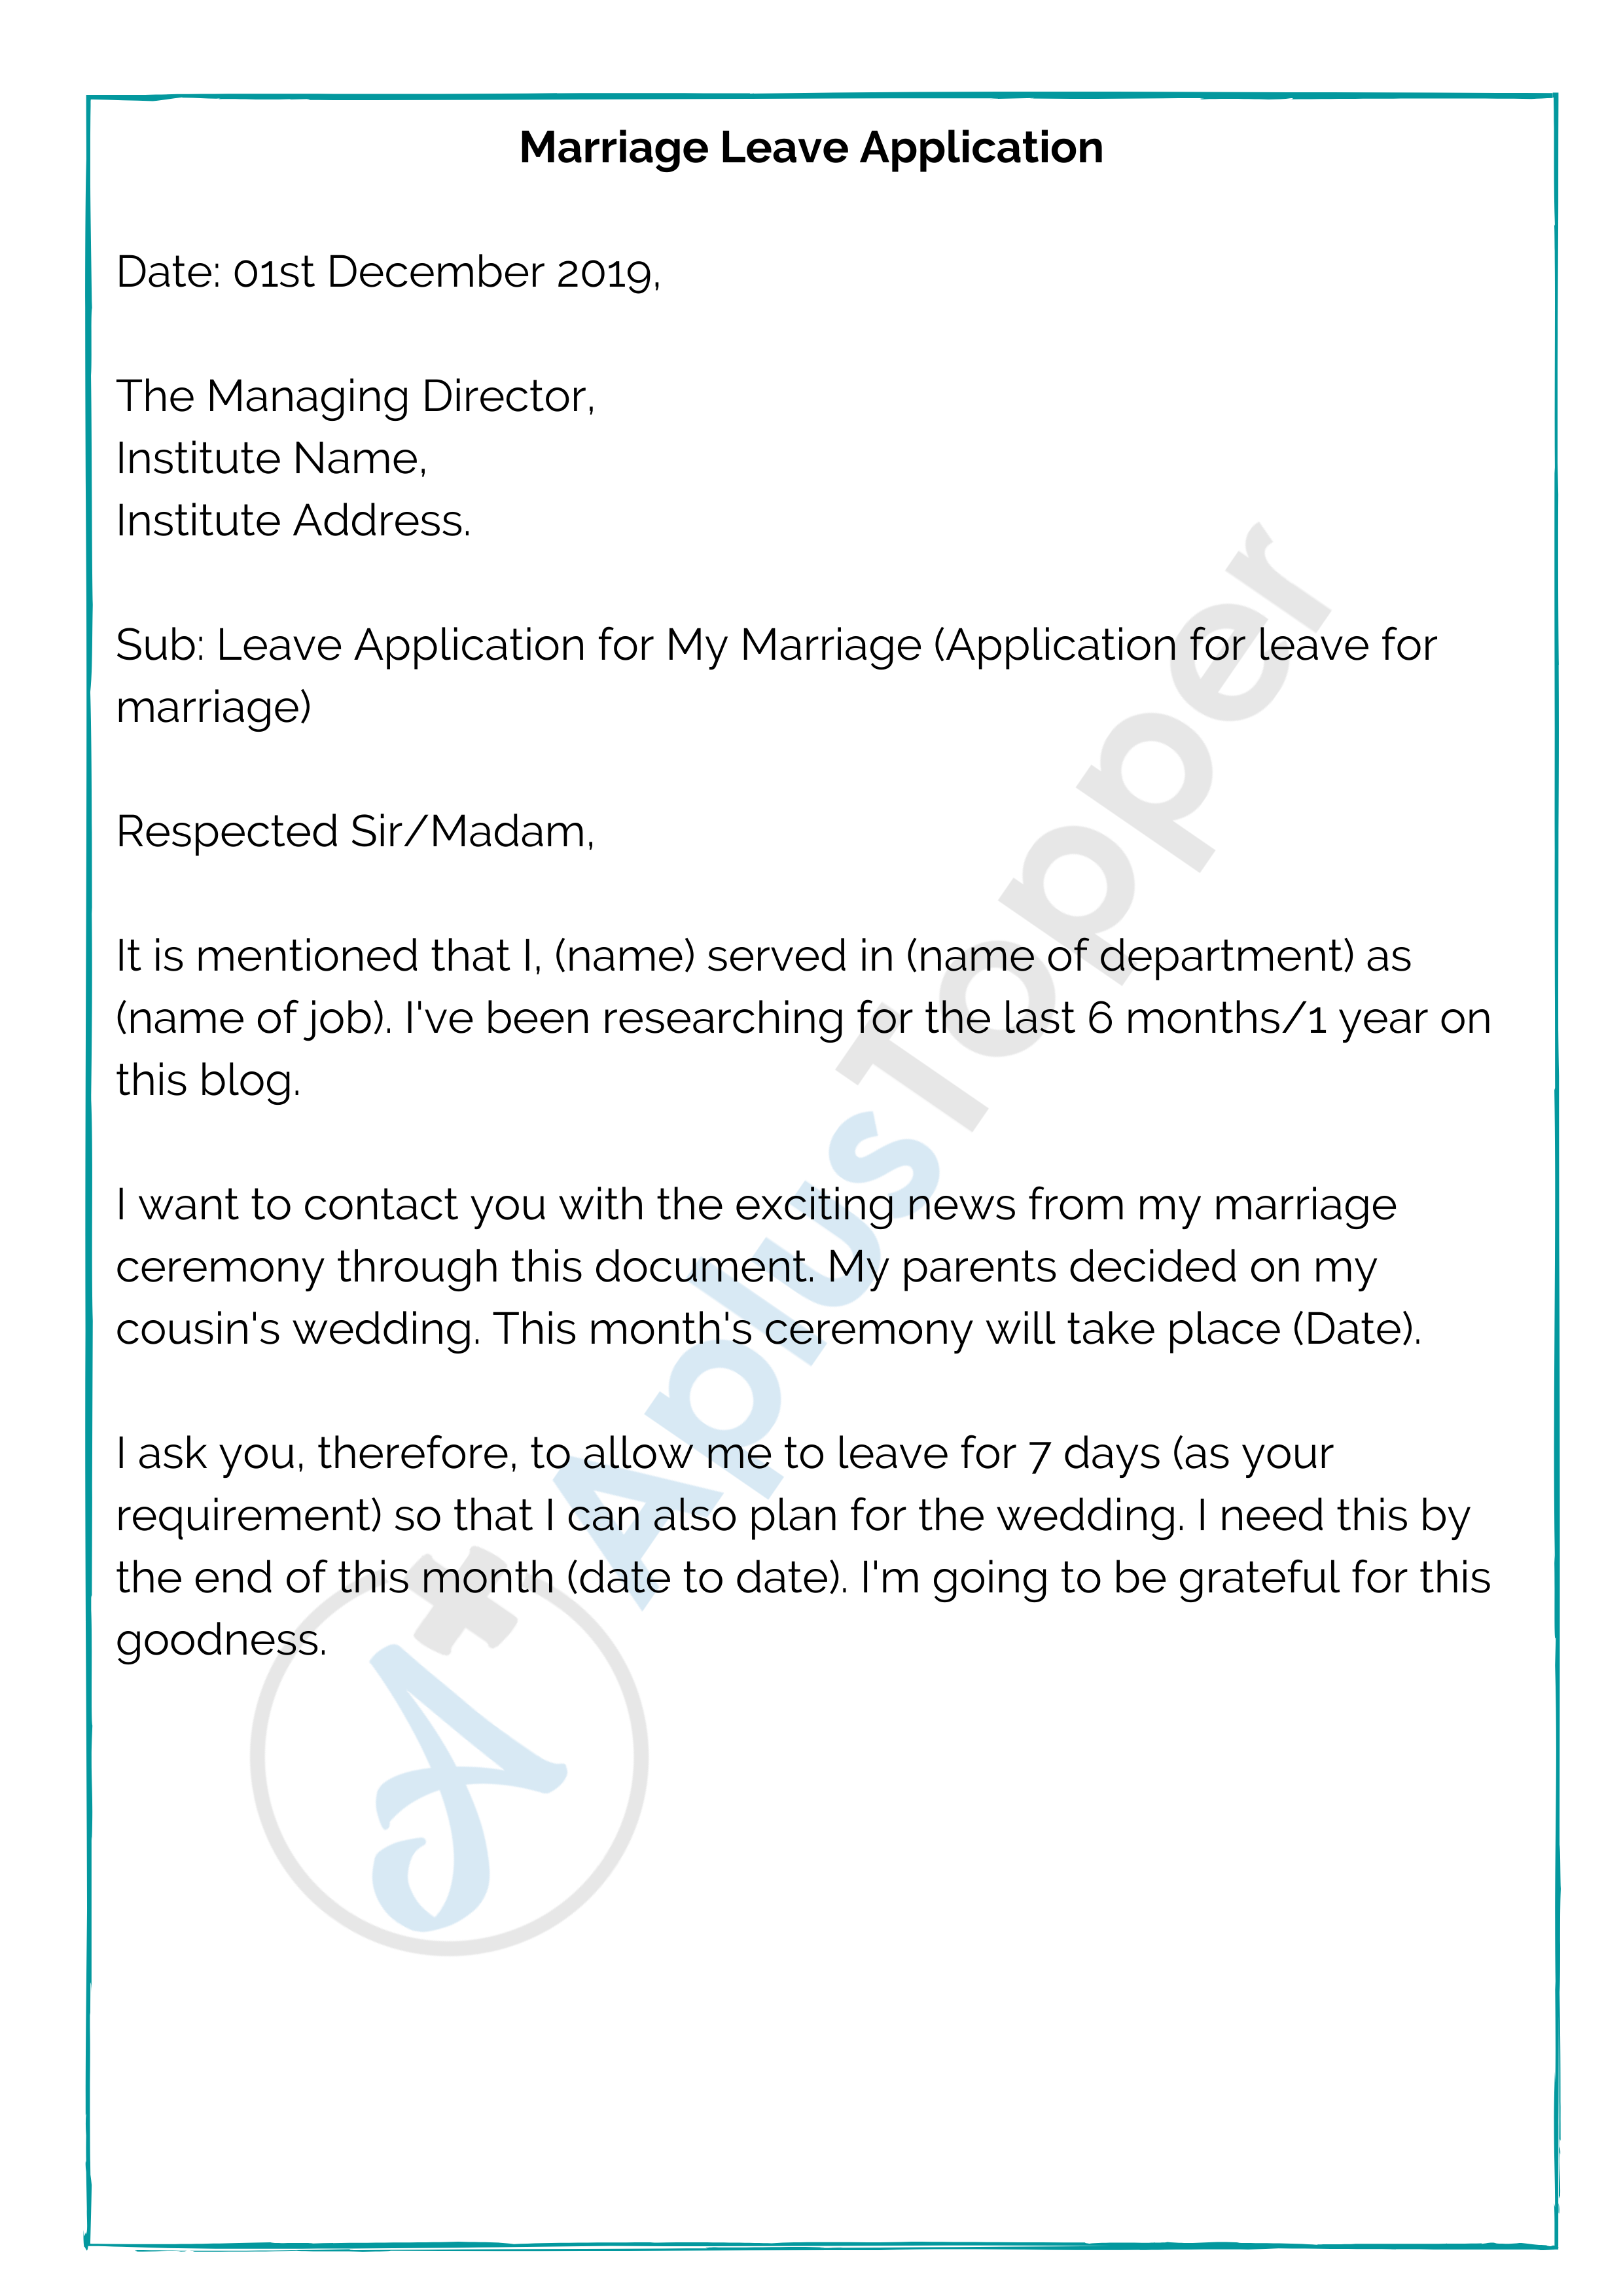 application letter for leave to attend marriage